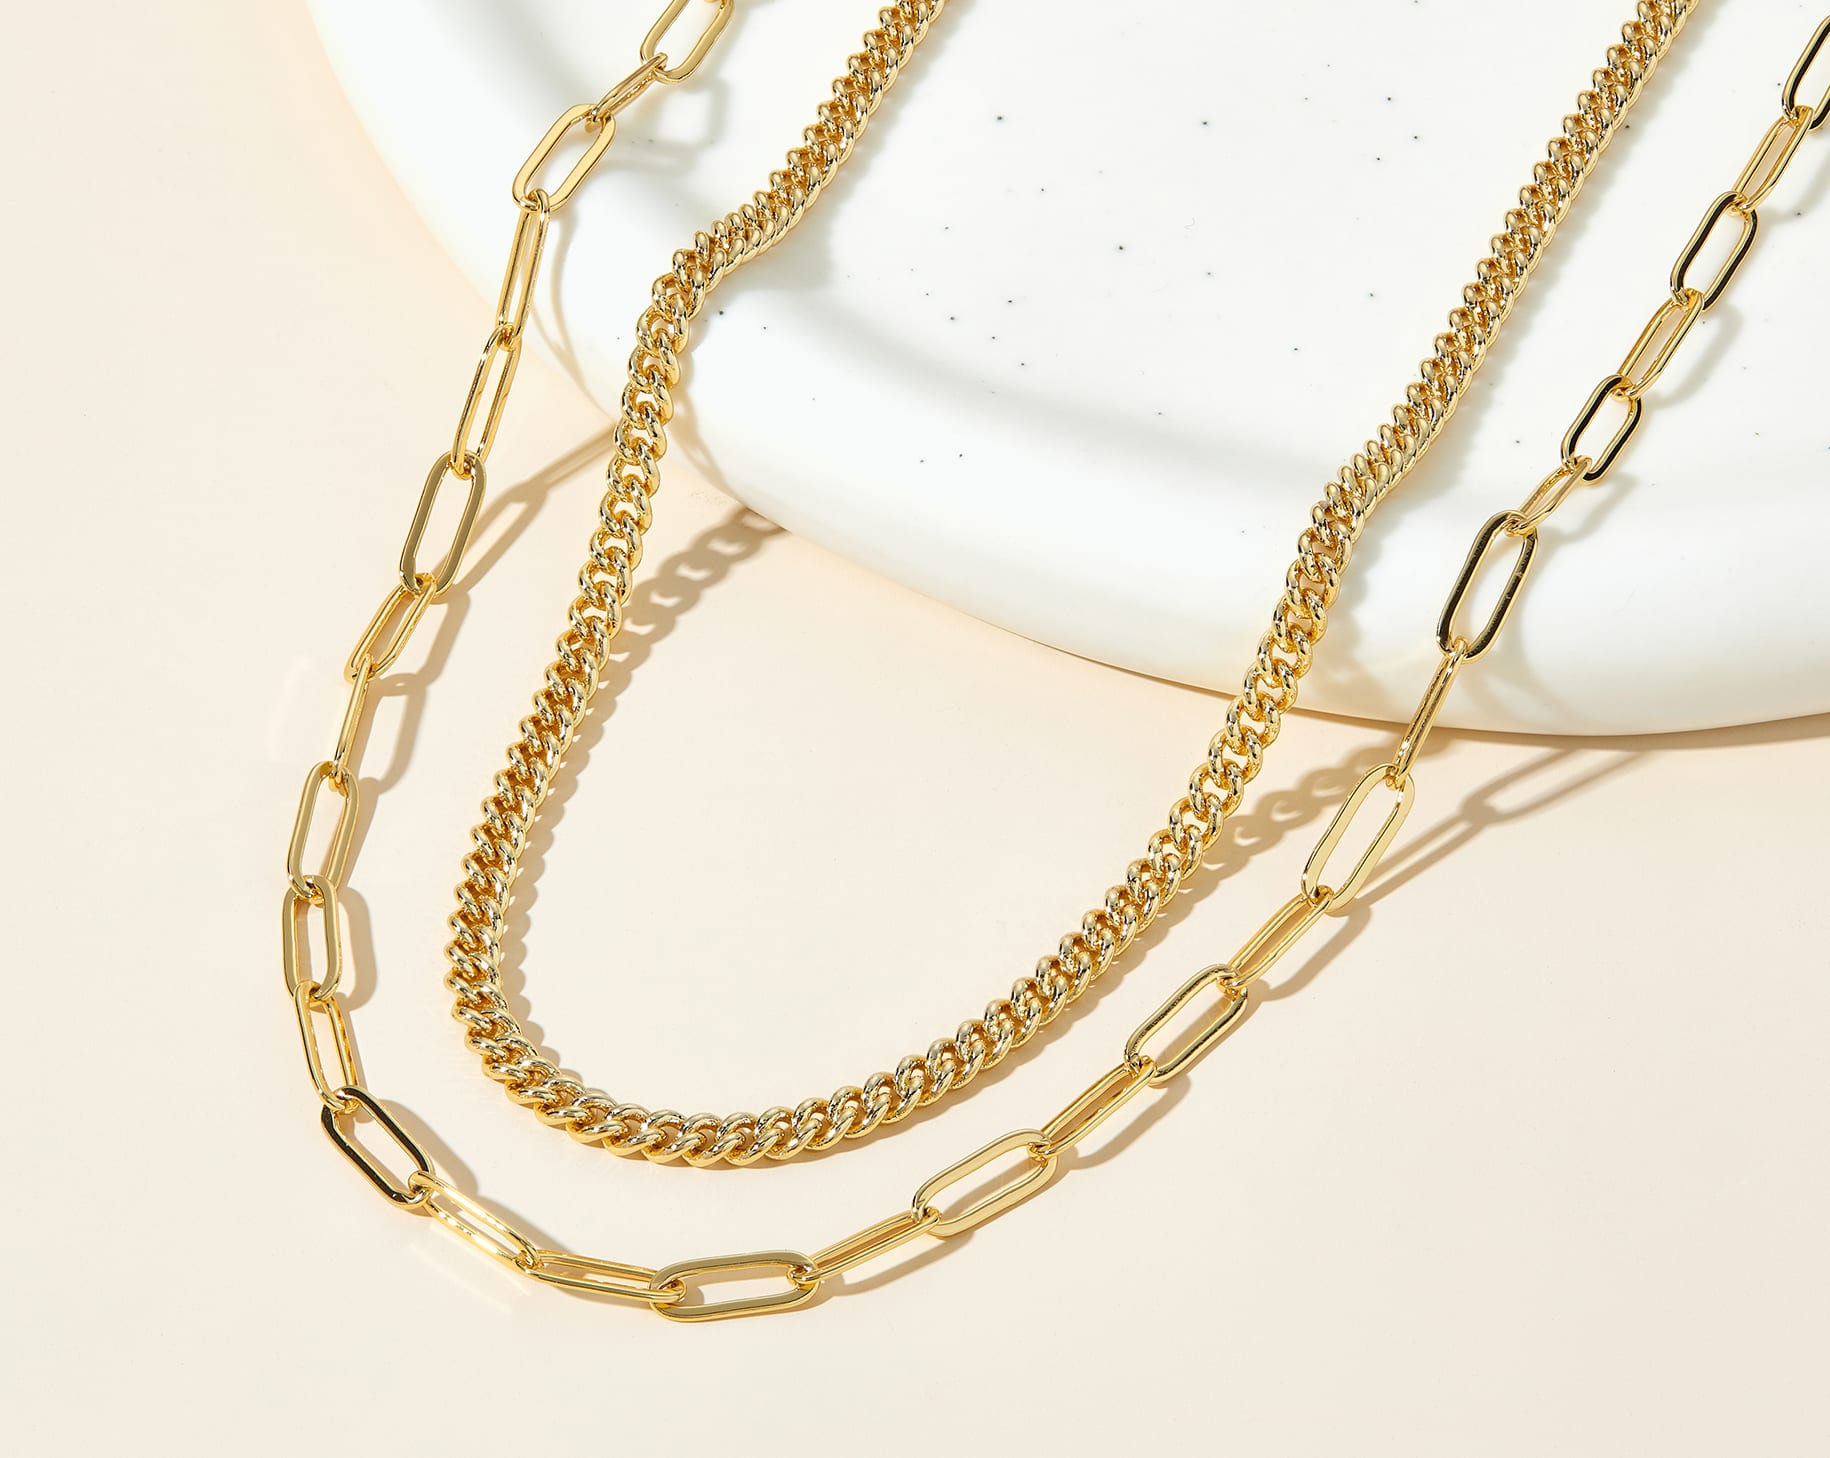 gold necklace stack on neutral background